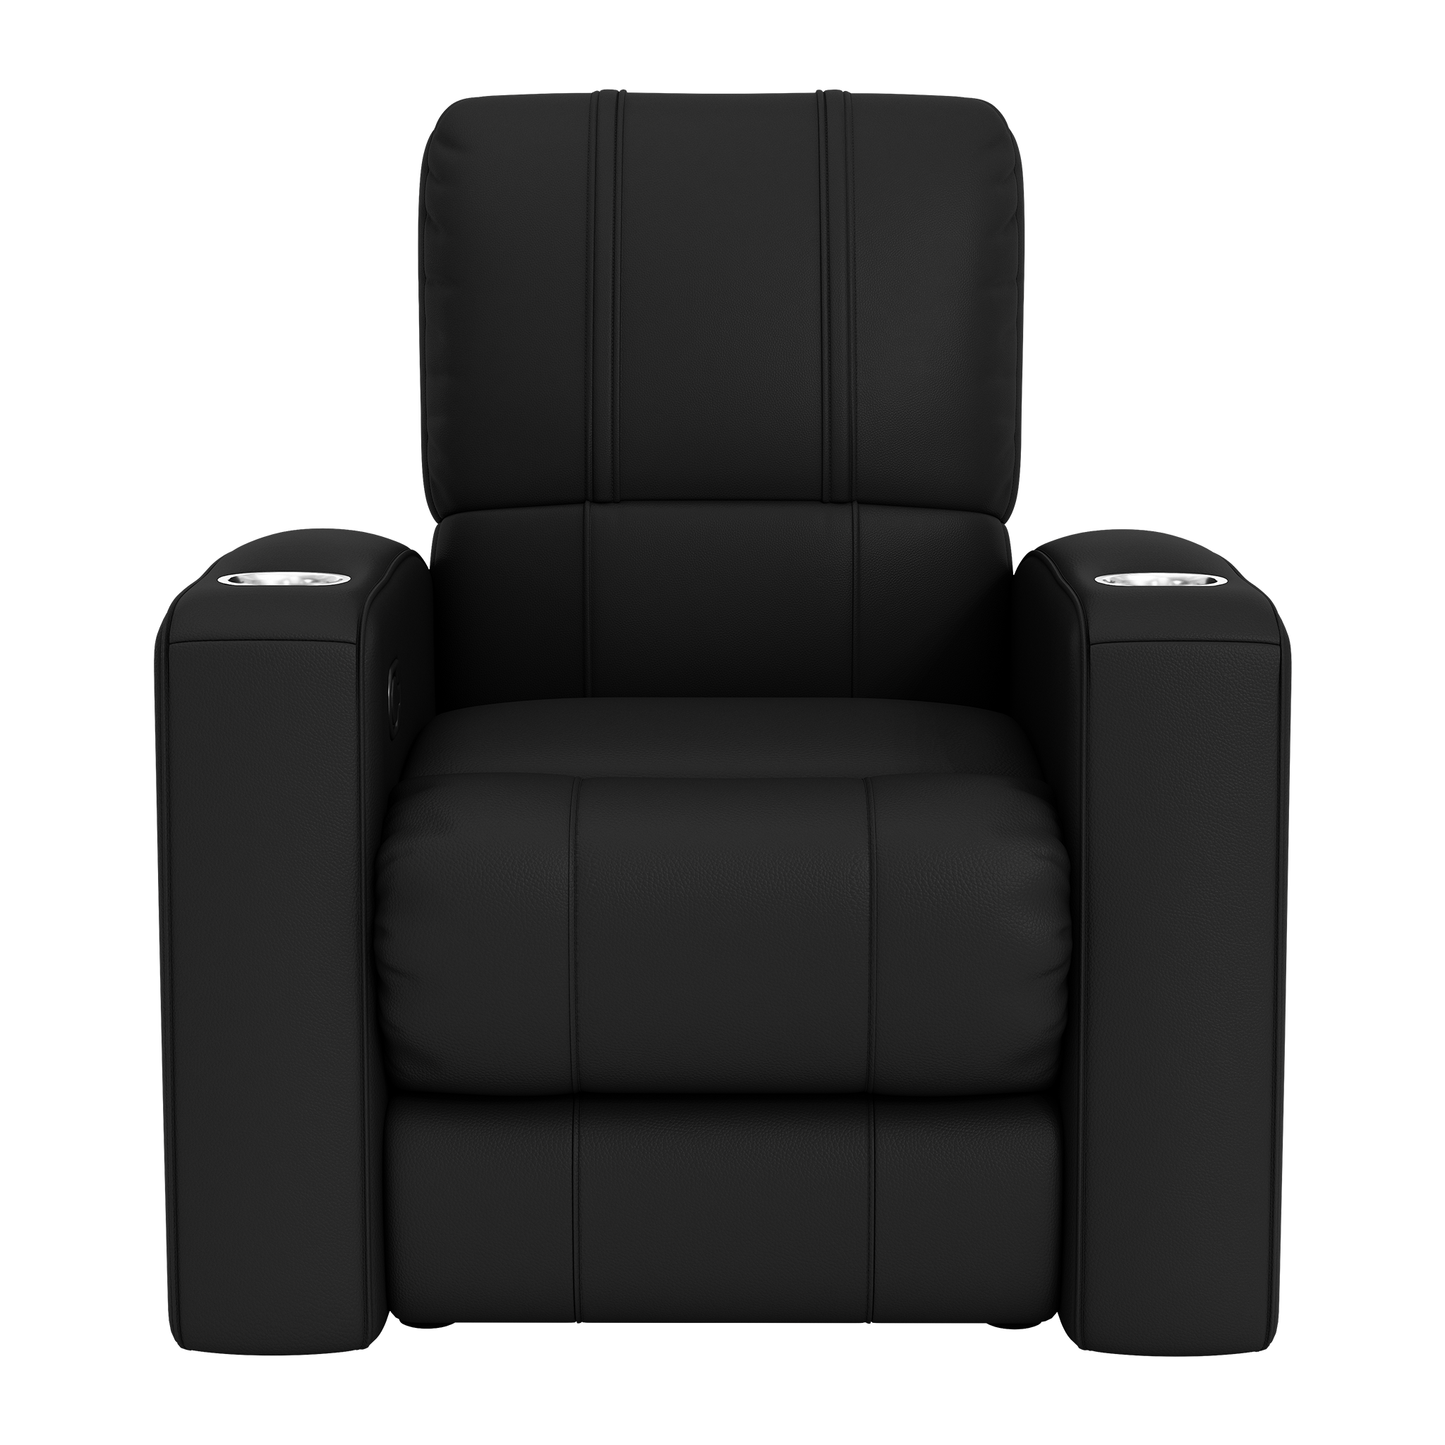 Relax Home Theater Recliner with Kansas City Royals Cooperstown